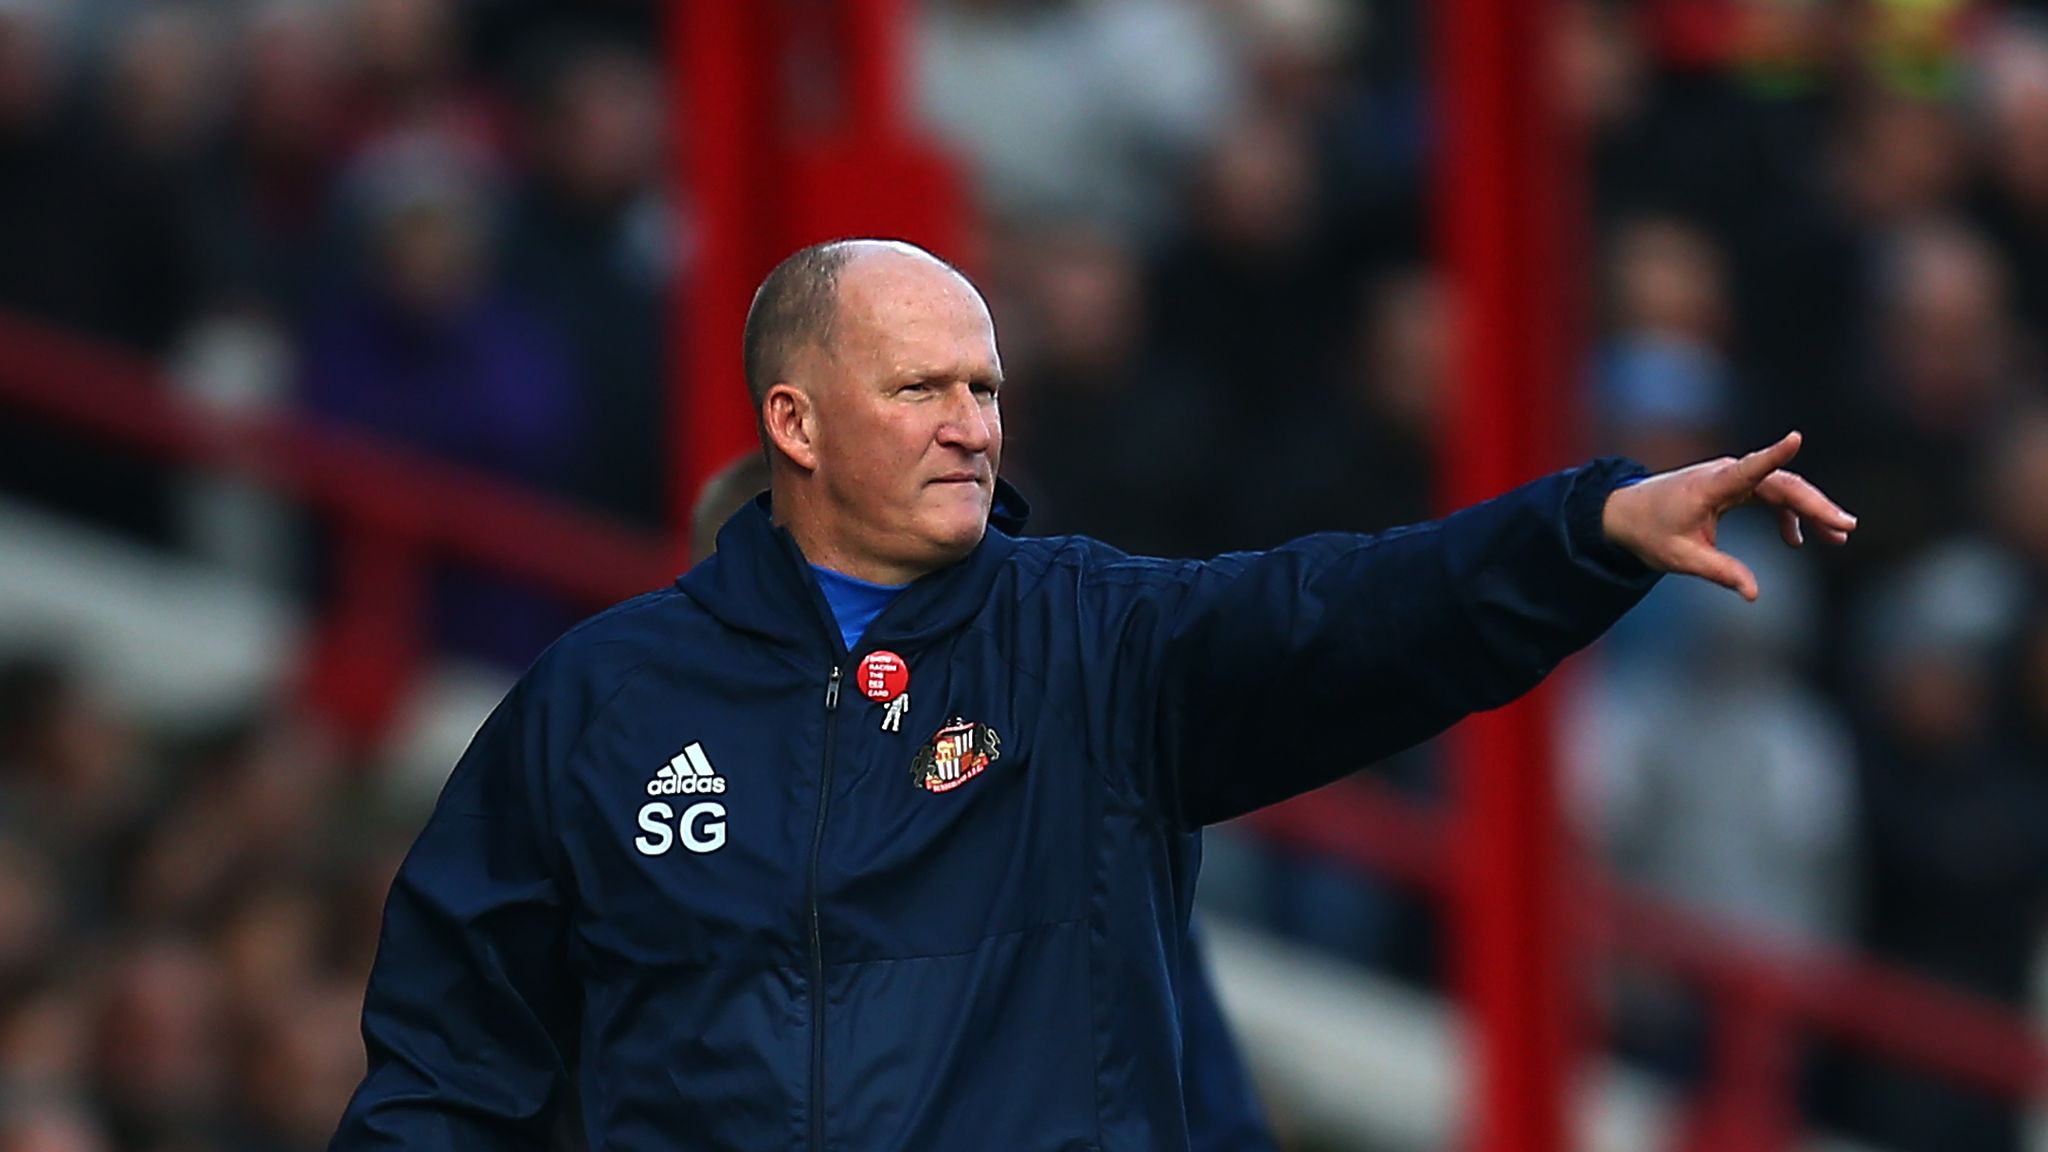 Sunderland sack manager Simon Grayson after 3-3 Championship draw with ...